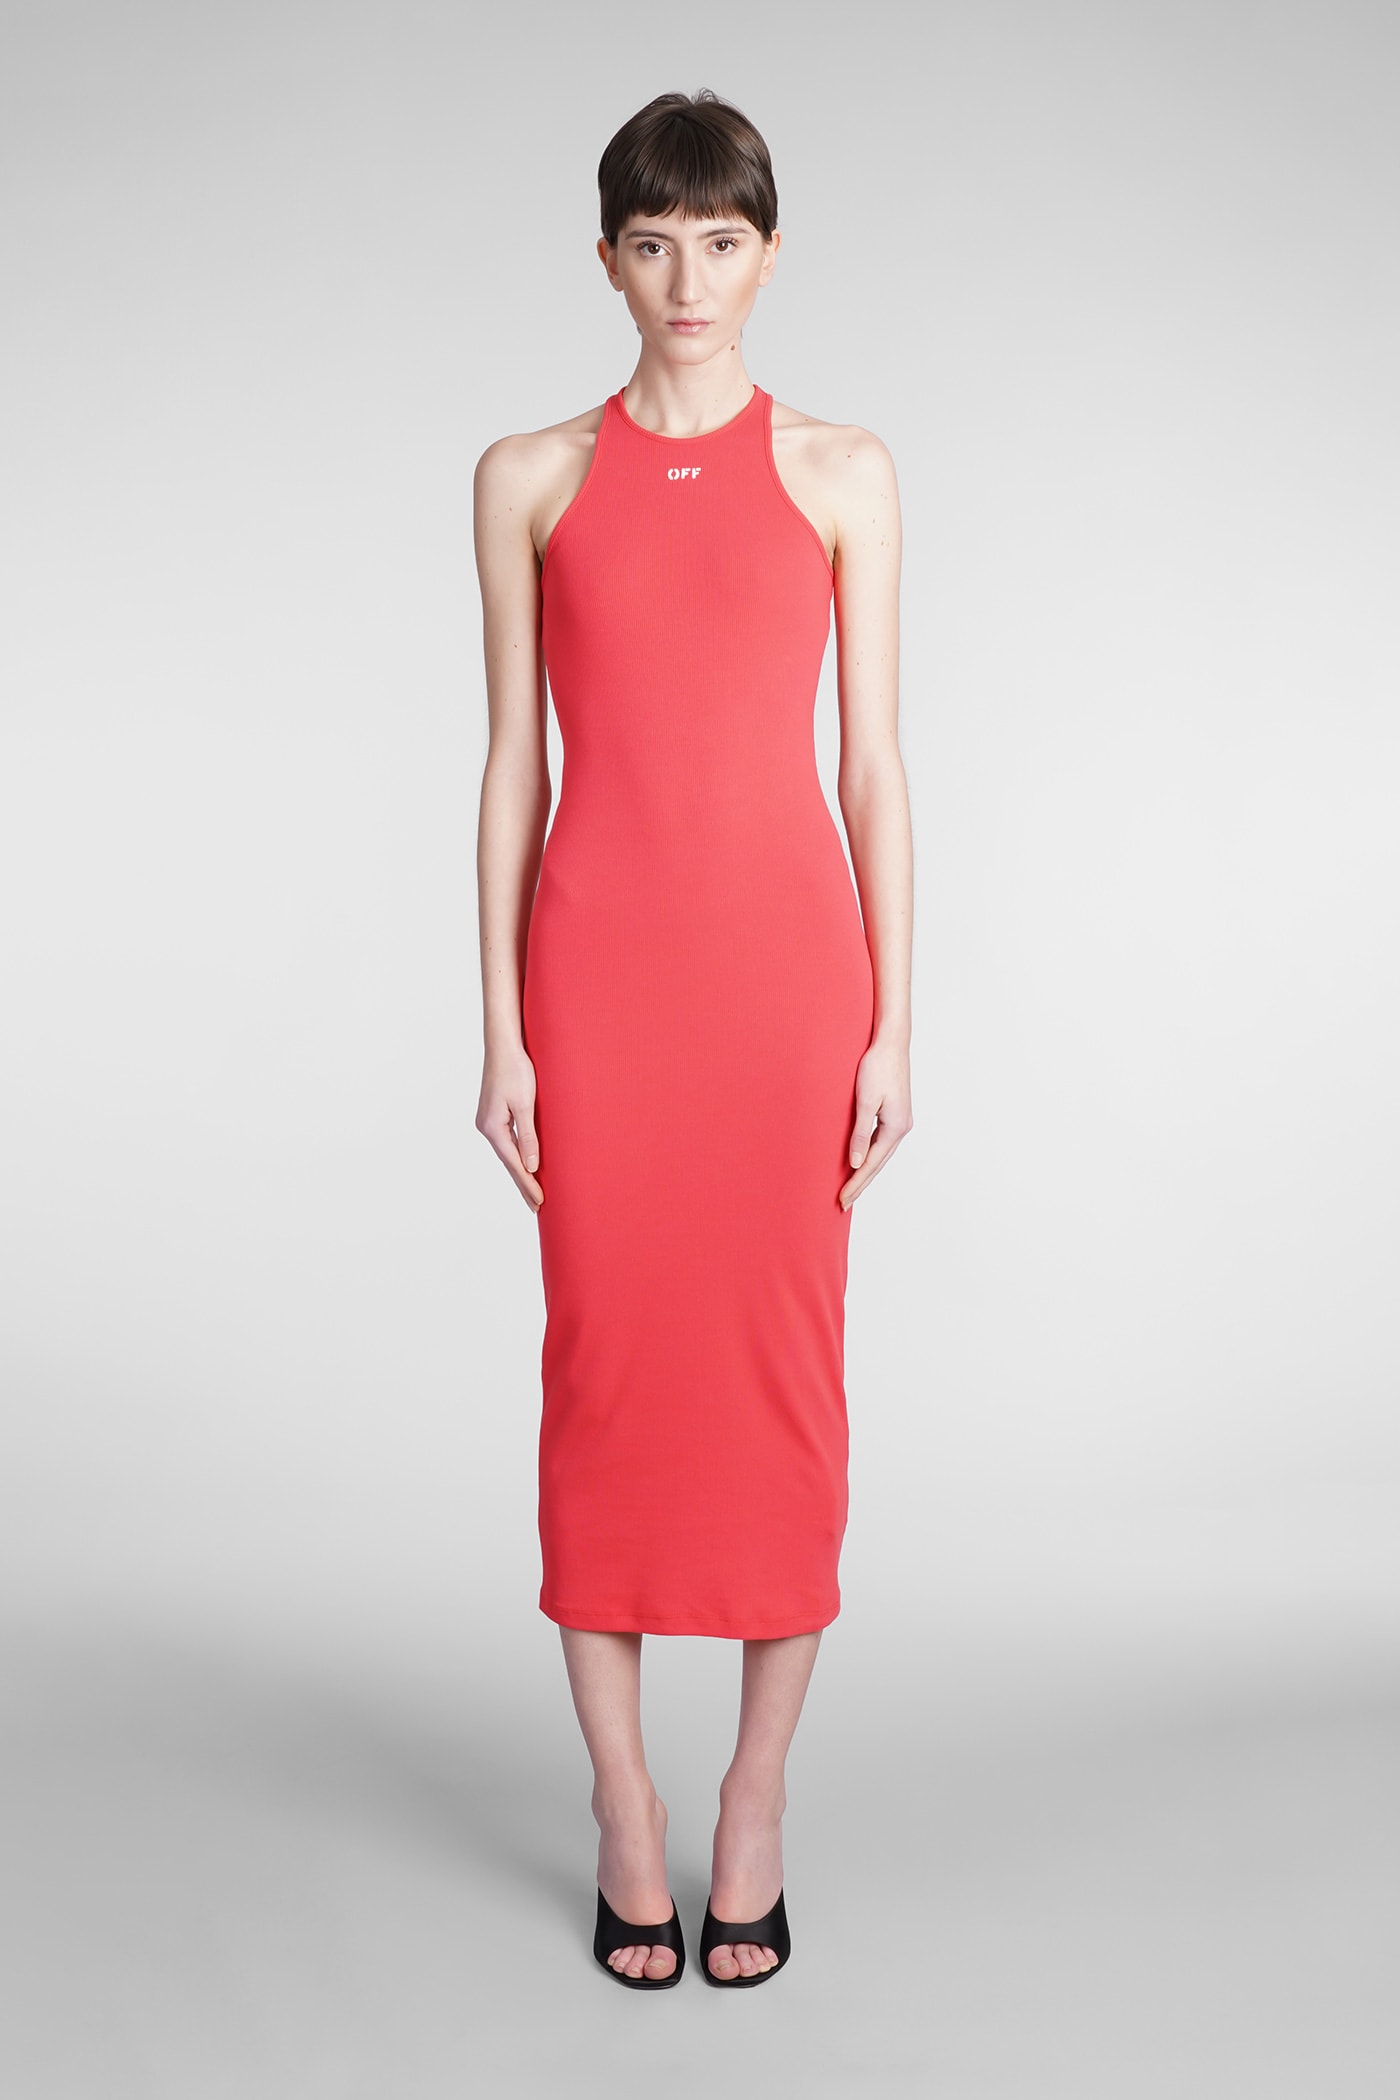 OFF-WHITE DRESS IN RED COTTON